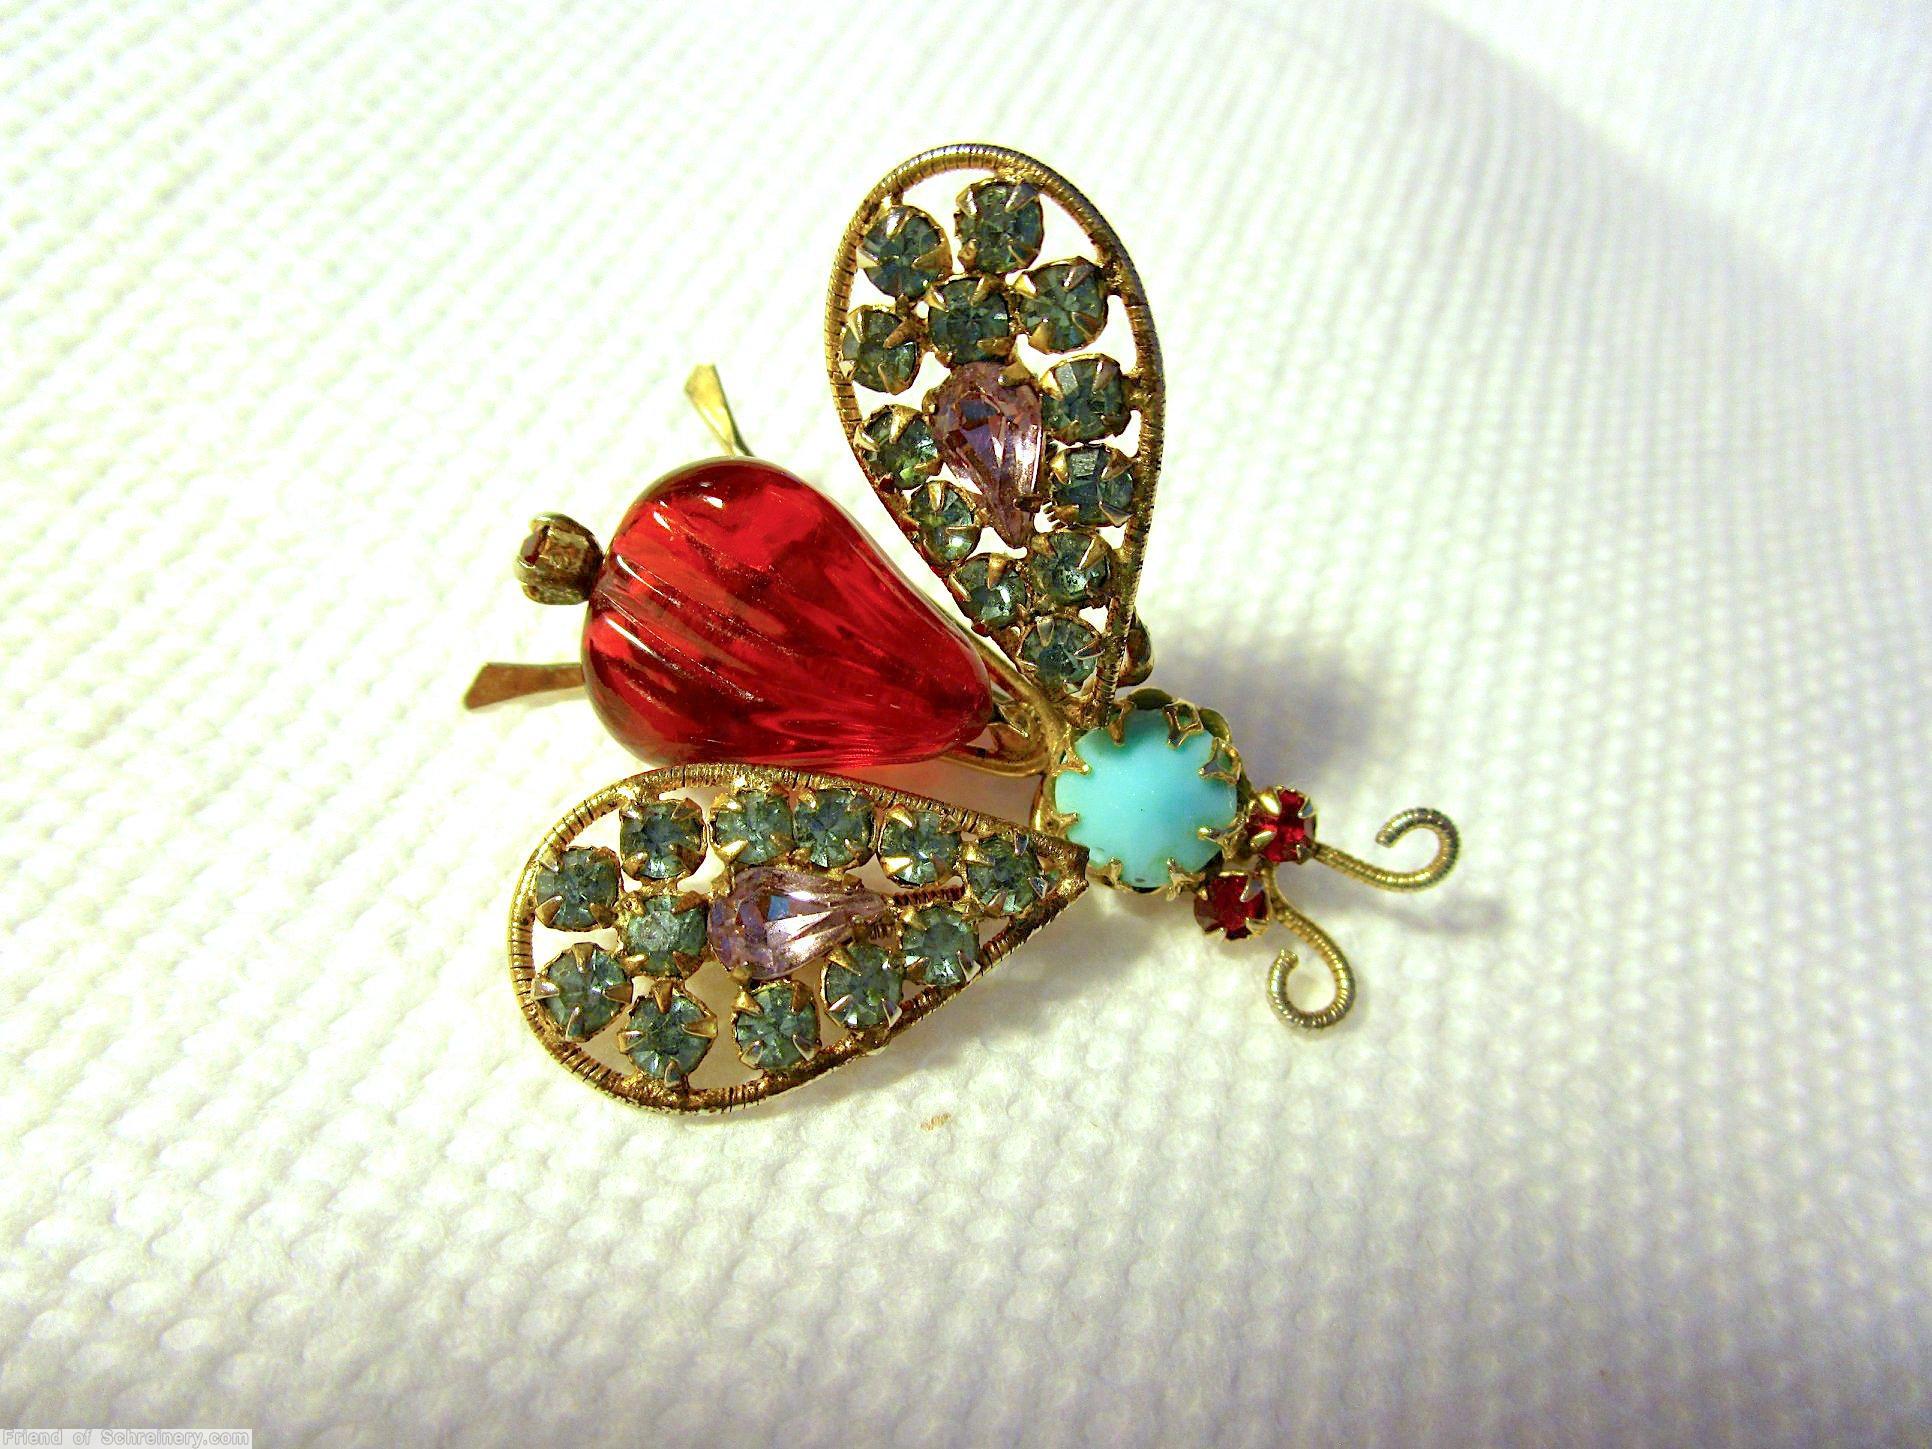 Schreiner trembler bug teardrop body 2 hammered end leg 1 teardrop 12 chaton wired wing chaton head 2 antenna ruby teardrop ice lavender ice blue opaque aqua chaton ruby small chaton goldtone jewelry